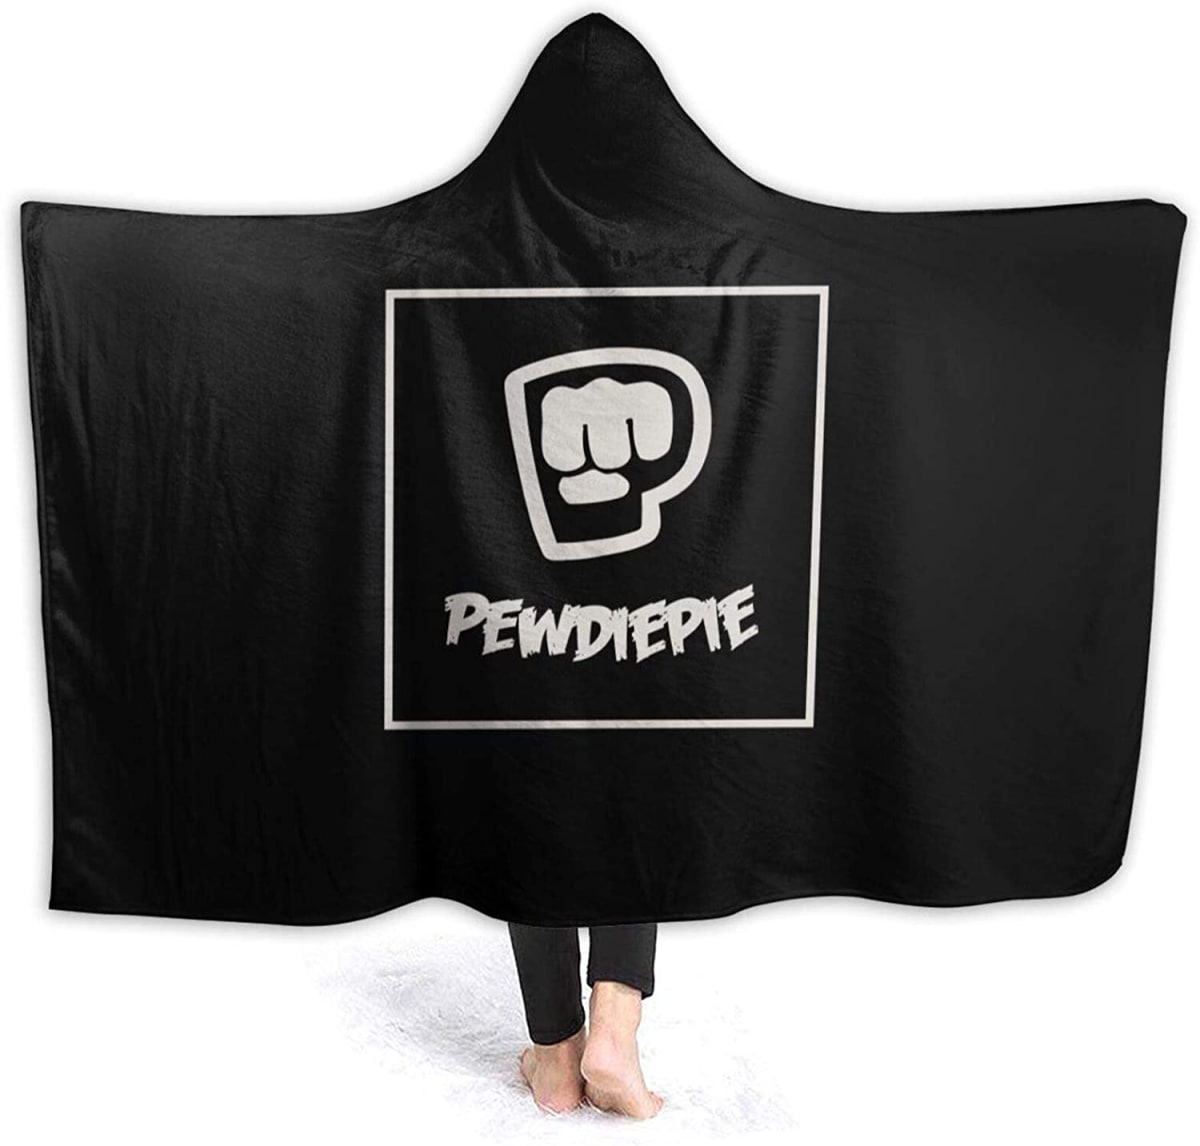 Pewdiepie Hooded Blanket for Mens Woman Soft Warm Fleece Throw Blanket Cloak Shawl Cape for Home Sofa Travel